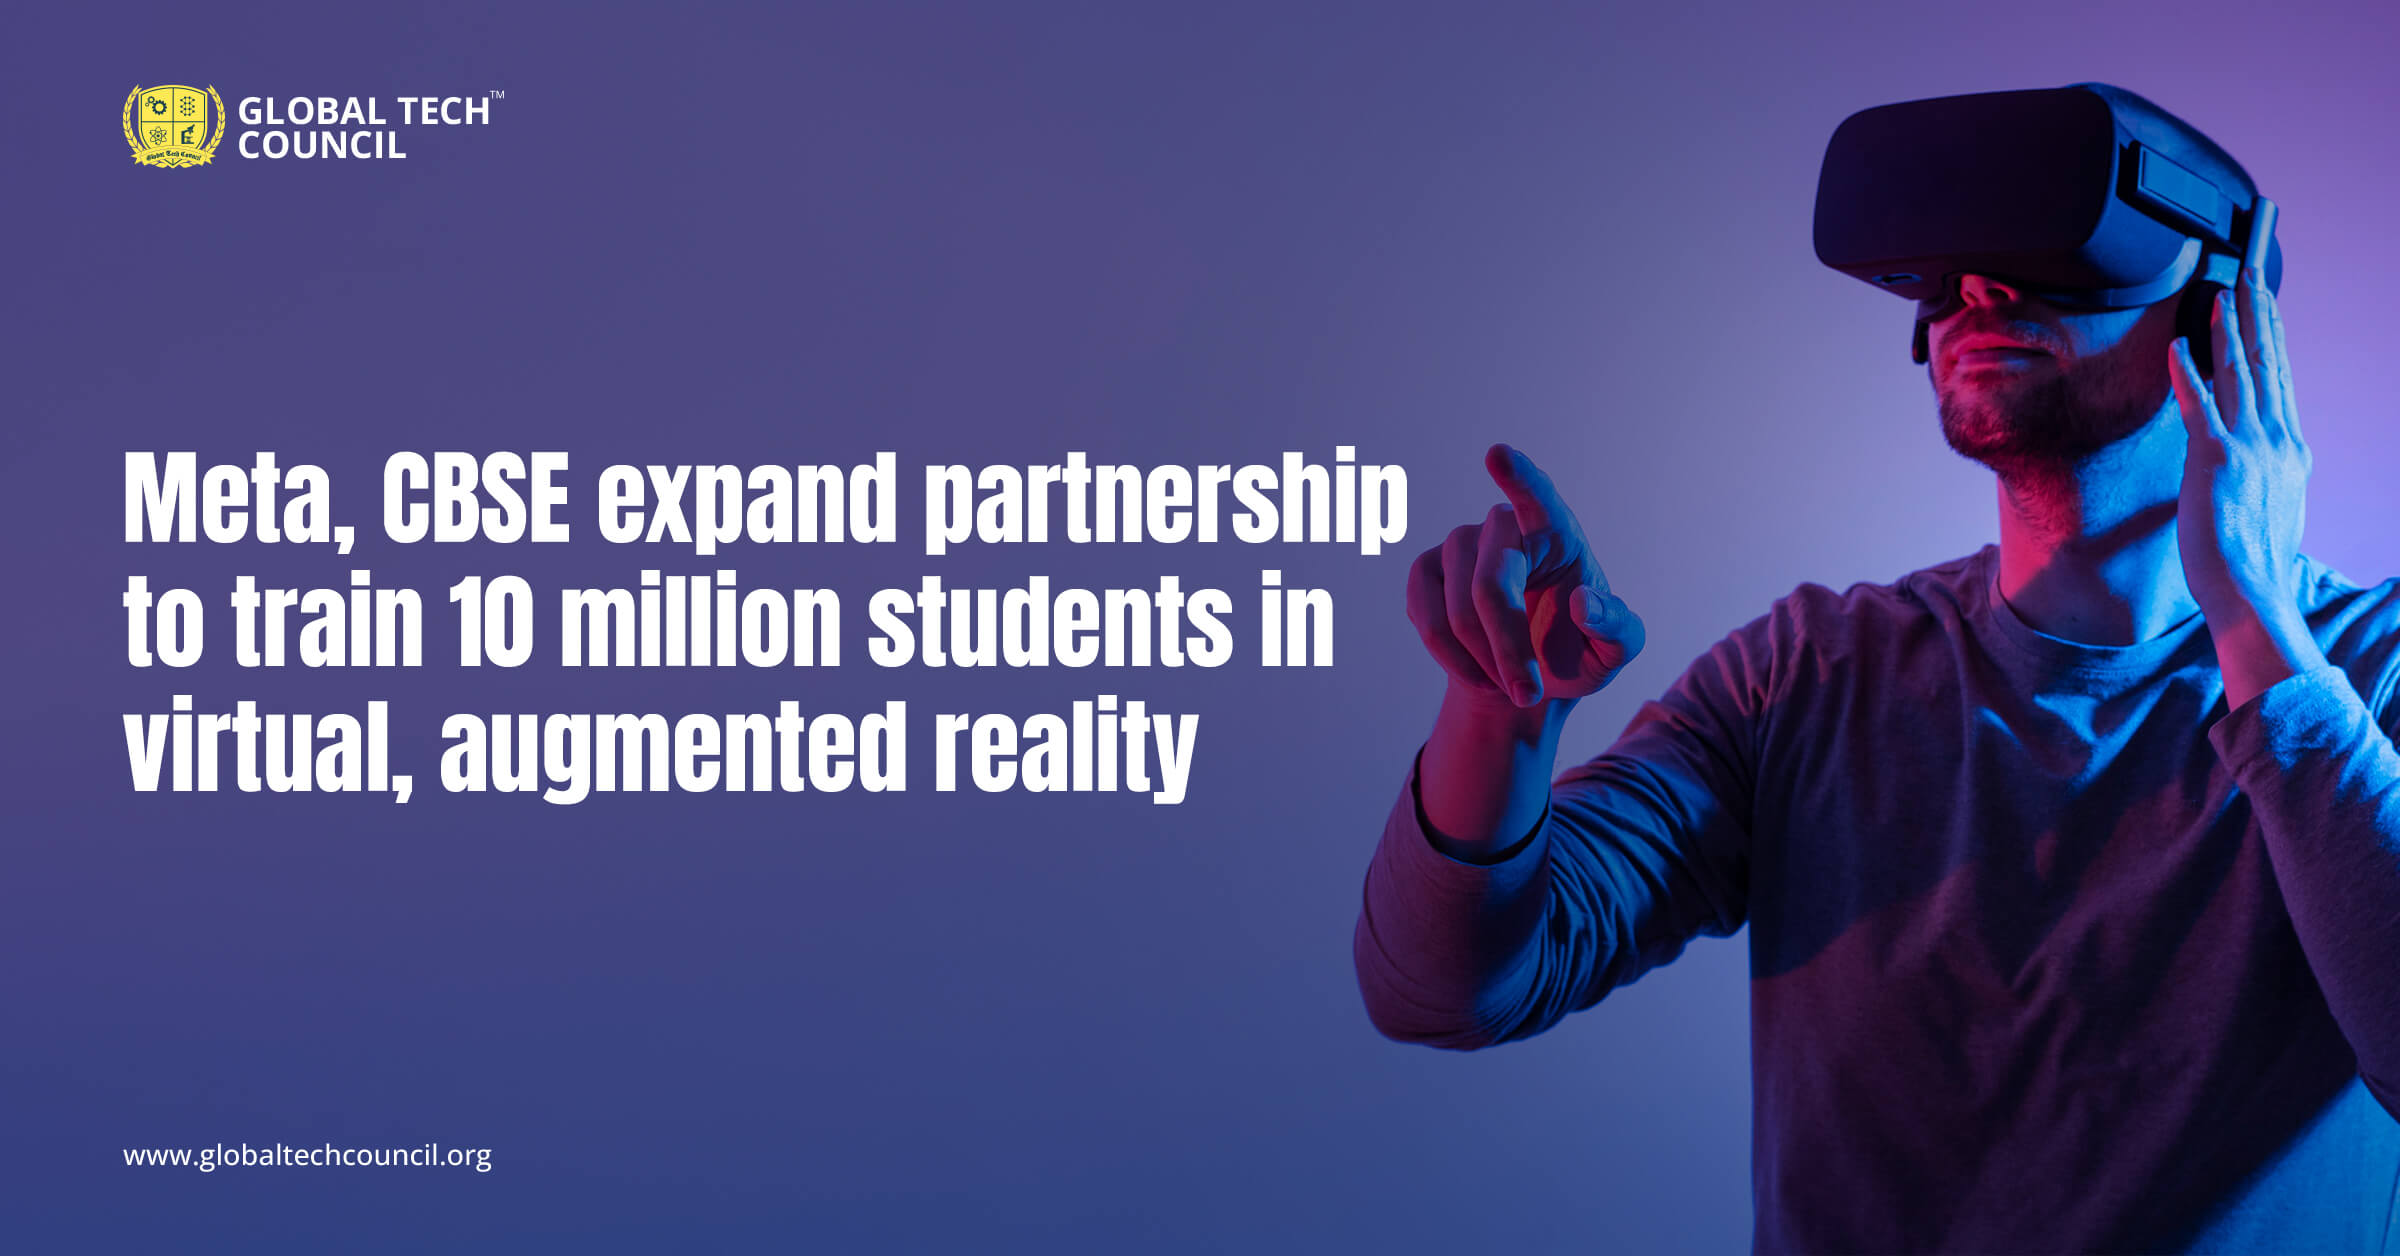 Meta, CBSE expand partnership to train 10 million students in virtual, augmented reality